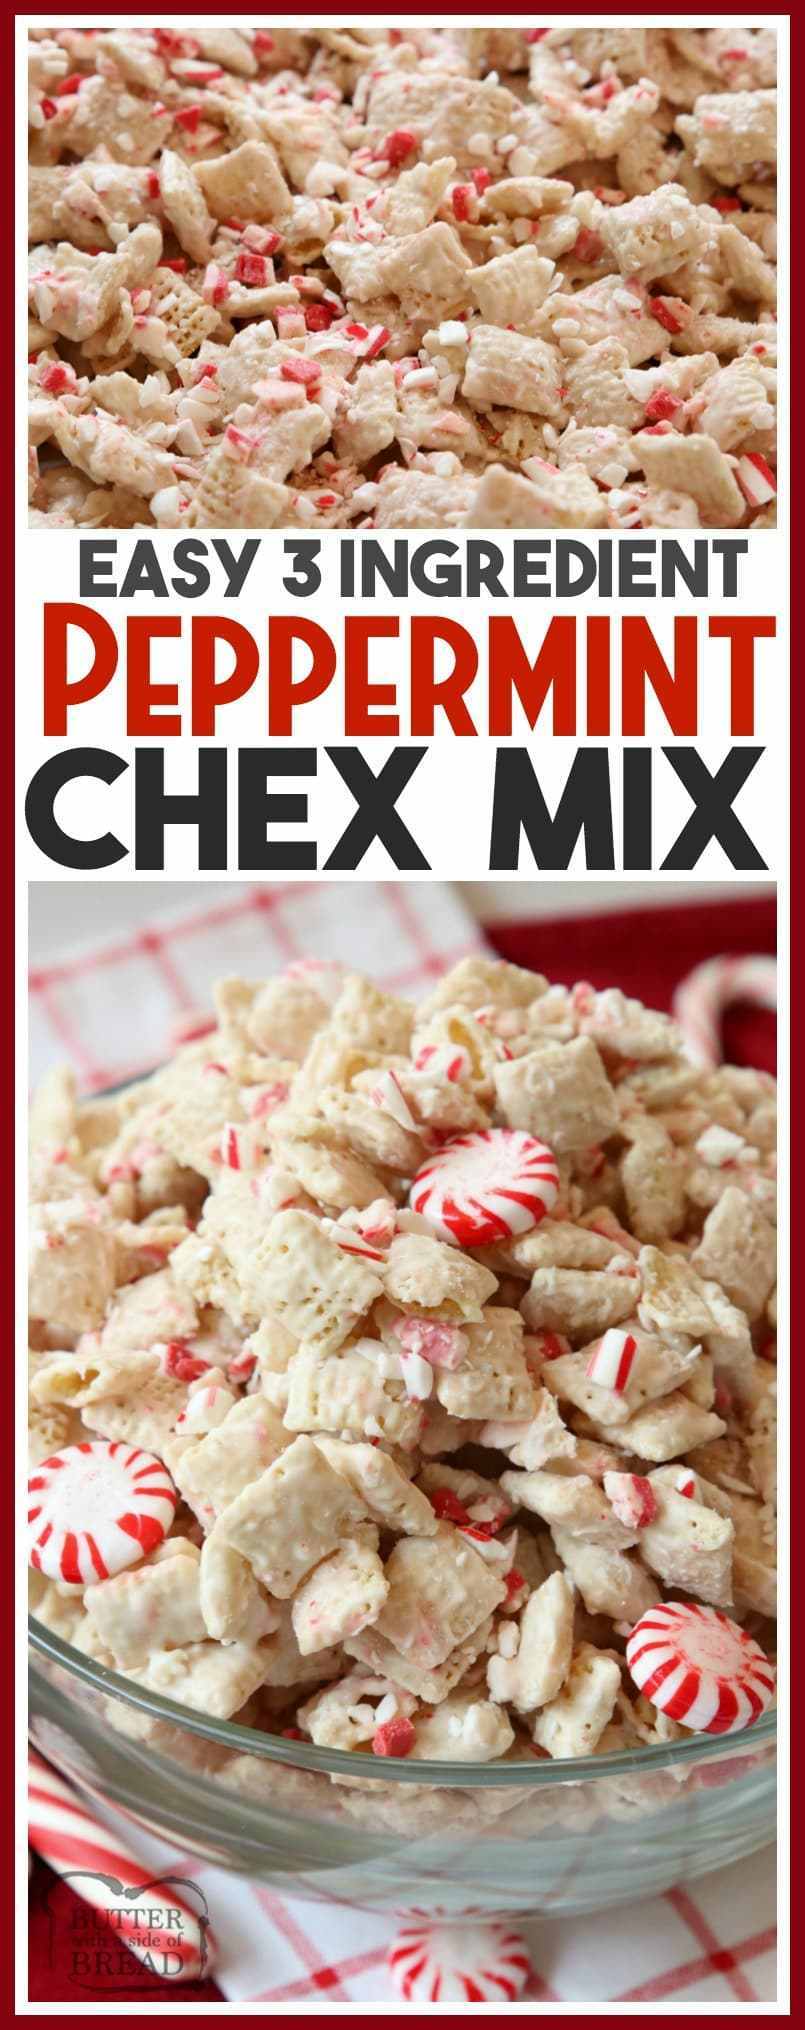 Peppermint Chex Mix made with only 3 ingredients in a few minutes! Simple recipe for festive, sweet peppermint treat that's perfect for holiday parties. Simple #peppermint #Christmas #recipe for #Holiday #Chex Mix from Butter With A Side of Bread